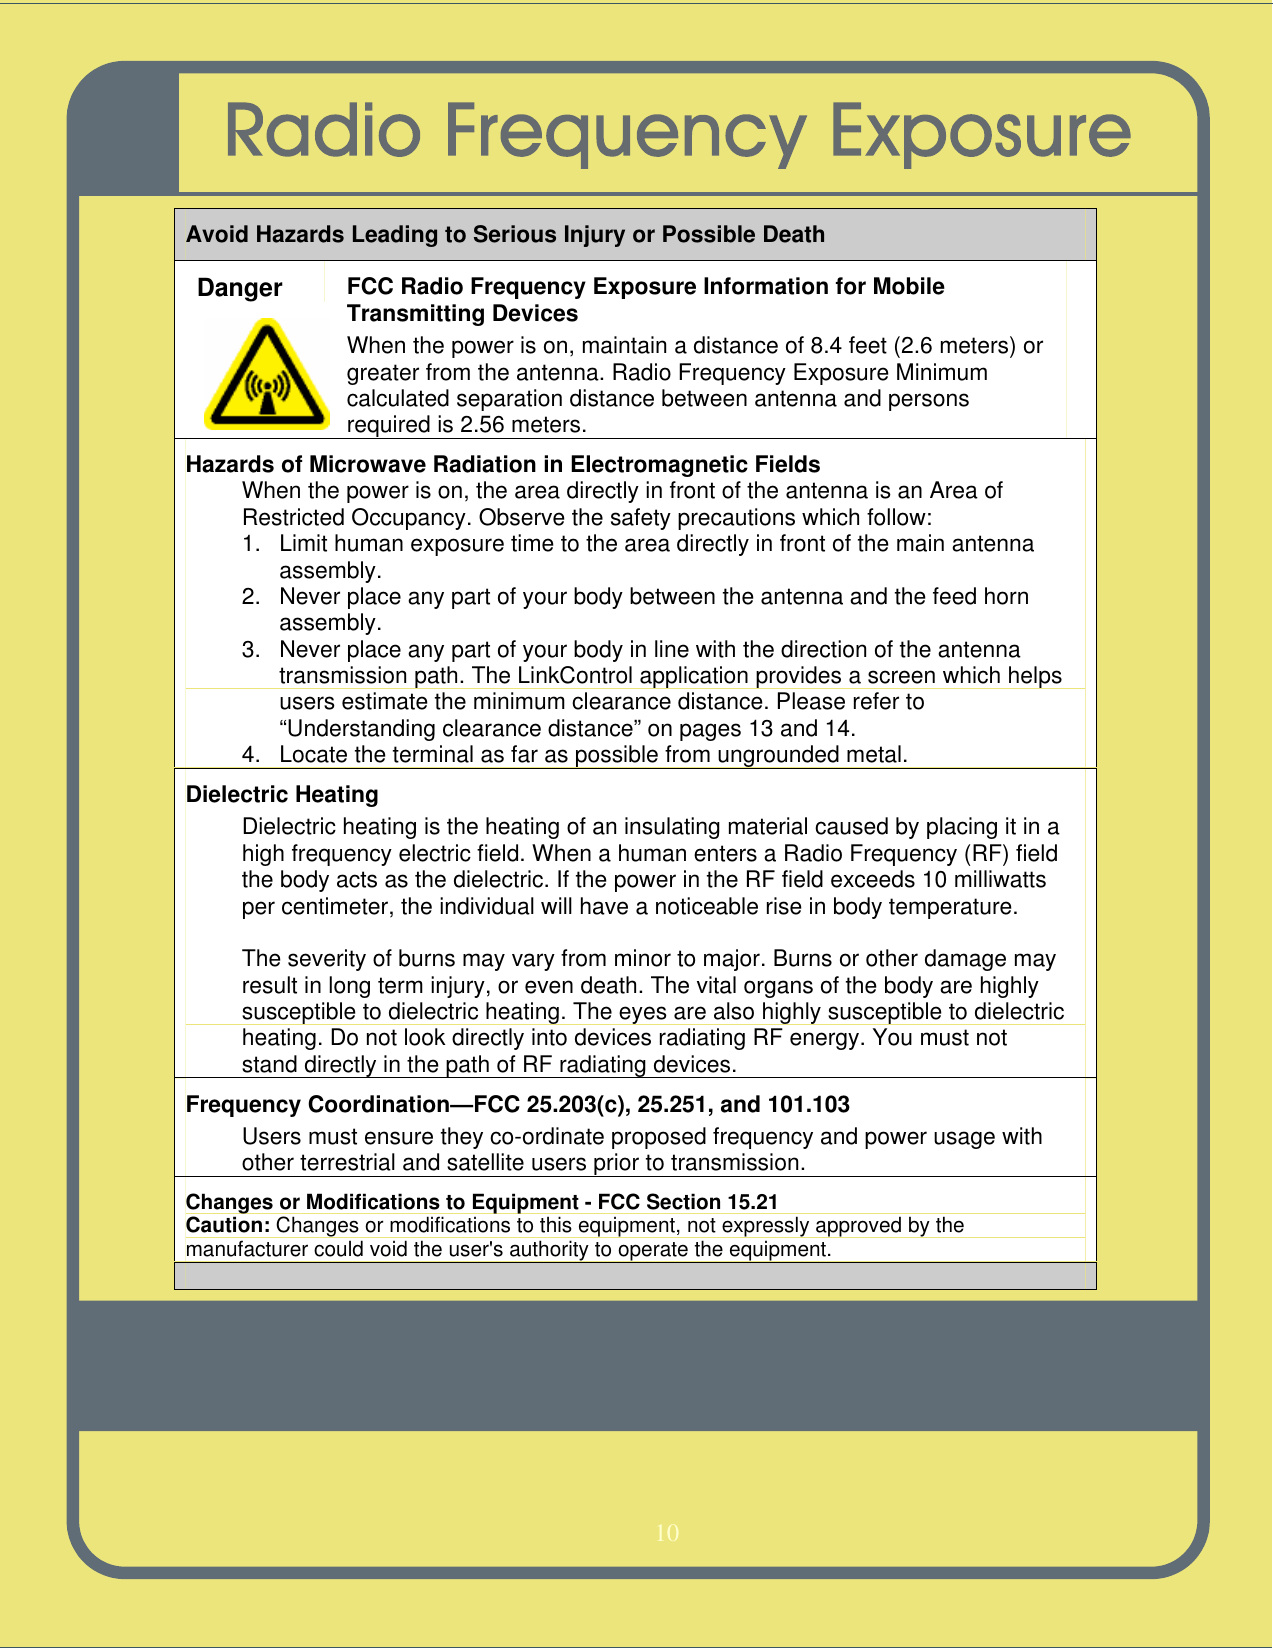   10   Avoid Hazards Leading to Serious Injury or Possible Death Danger FCC Radio Frequency Exposure Information for Mobile Transmitting Devices When the power is on, maintain a distance of 8.4 feet (2.6 meters) or greater from the antenna. Radio Frequency Exposure Minimum calculated separation distance between antenna and persons required is 2.56 meters.  Hazards of Microwave Radiation in Electromagnetic Fields When the power is on, the area directly in front of the antenna is an Area of Restricted Occupancy. Observe the safety precautions which follow: 1. Limit human exposure time to the area directly in front of the main antenna assembly. 2. Never place any part of your body between the antenna and the feed horn assembly. 3. Never place any part of your body in line with the direction of the antenna transmission path. The LinkControl application provides a screen which helps users estimate the minimum clearance distance. Please refer to “Understanding clearance distance” on pages 13 and 14. 4. Locate the terminal as far as possible from ungrounded metal. Dielectric Heating Dielectric heating is the heating of an insulating material caused by placing it in a high frequency electric field. When a human enters a Radio Frequency (RF) field the body acts as the dielectric. If the power in the RF field exceeds 10 milliwatts per centimeter, the individual will have a noticeable rise in body temperature.  The severity of burns may vary from minor to major. Burns or other damage may result in long term injury, or even death. The vital organs of the body are highly susceptible to dielectric heating. The eyes are also highly susceptible to dielectric heating. Do not look directly into devices radiating RF energy. You must not stand directly in the path of RF radiating devices. Frequency Coordination—FCC 25.203(c), 25.251, and 101.103 Users must ensure they co-ordinate proposed frequency and power usage with other terrestrial and satellite users prior to transmission. Changes or Modifications to Equipment - FCC Section 15.21 Caution: Changes or modifications to this equipment, not expressly approved by the manufacturer could void the user&apos;s authority to operate the equipment.    